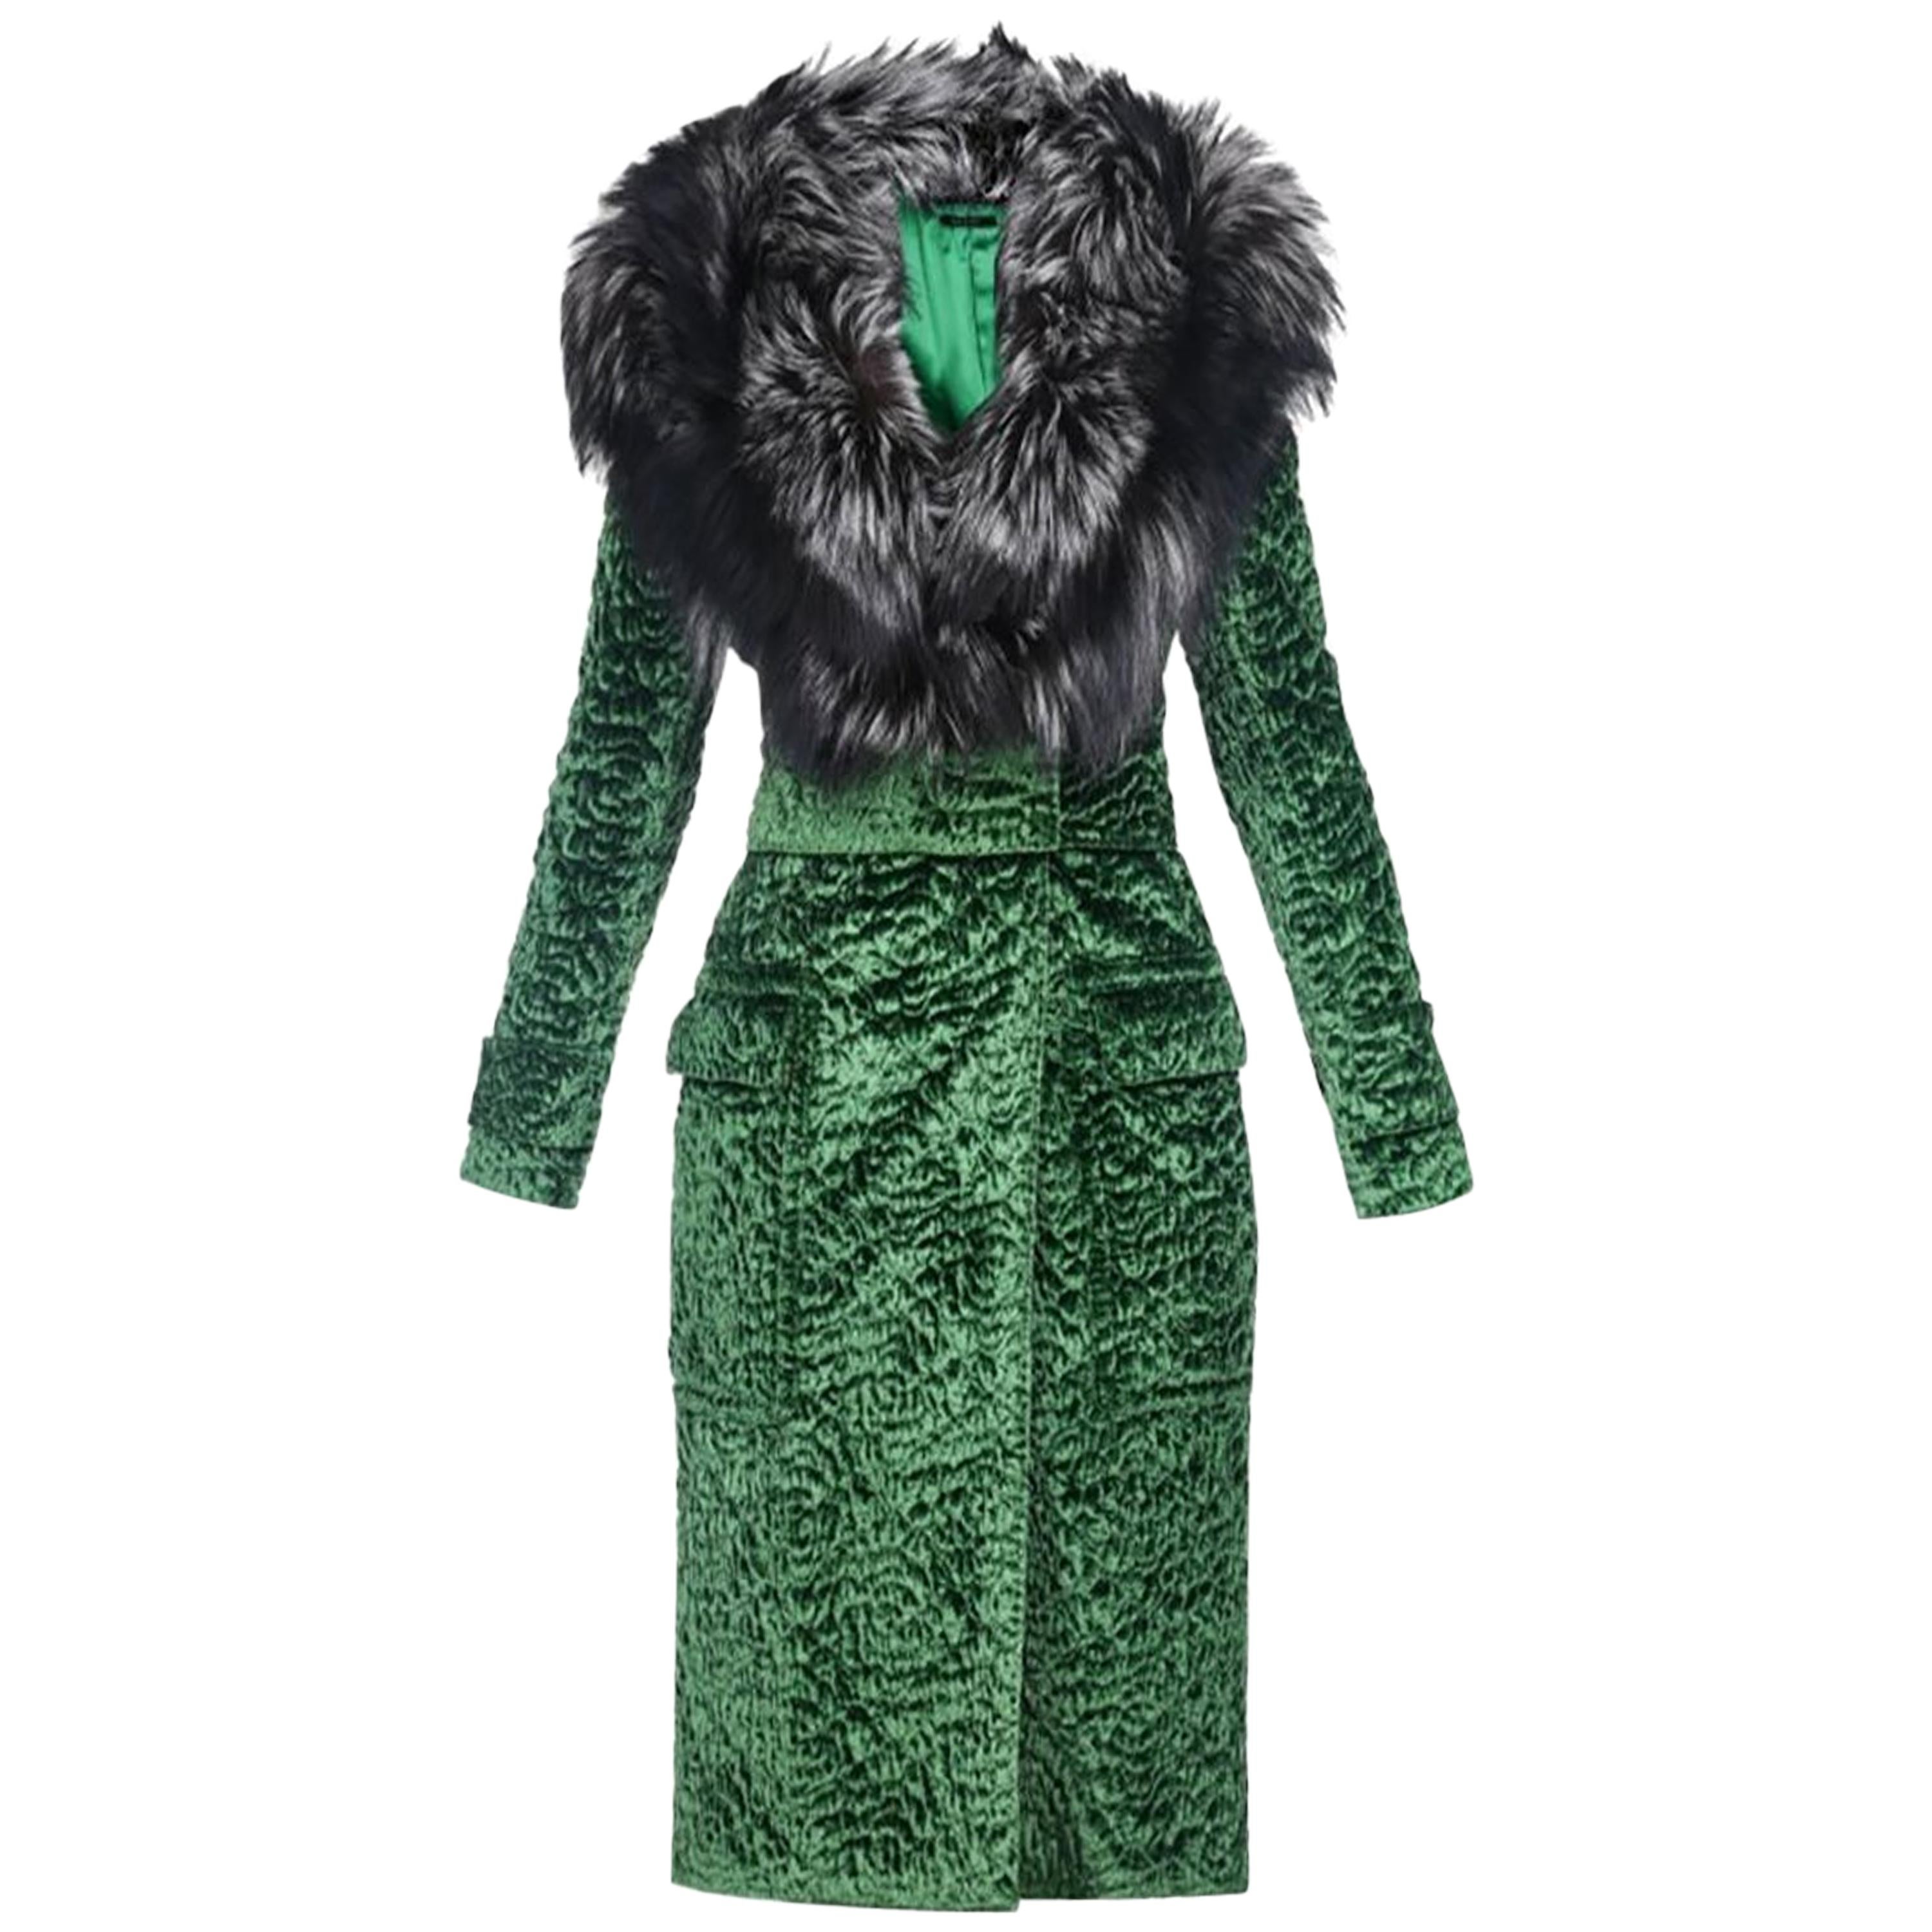 New Tom Ford Forest Green Astrakan Velvet Coat with Fox Fur from Ad Campaign